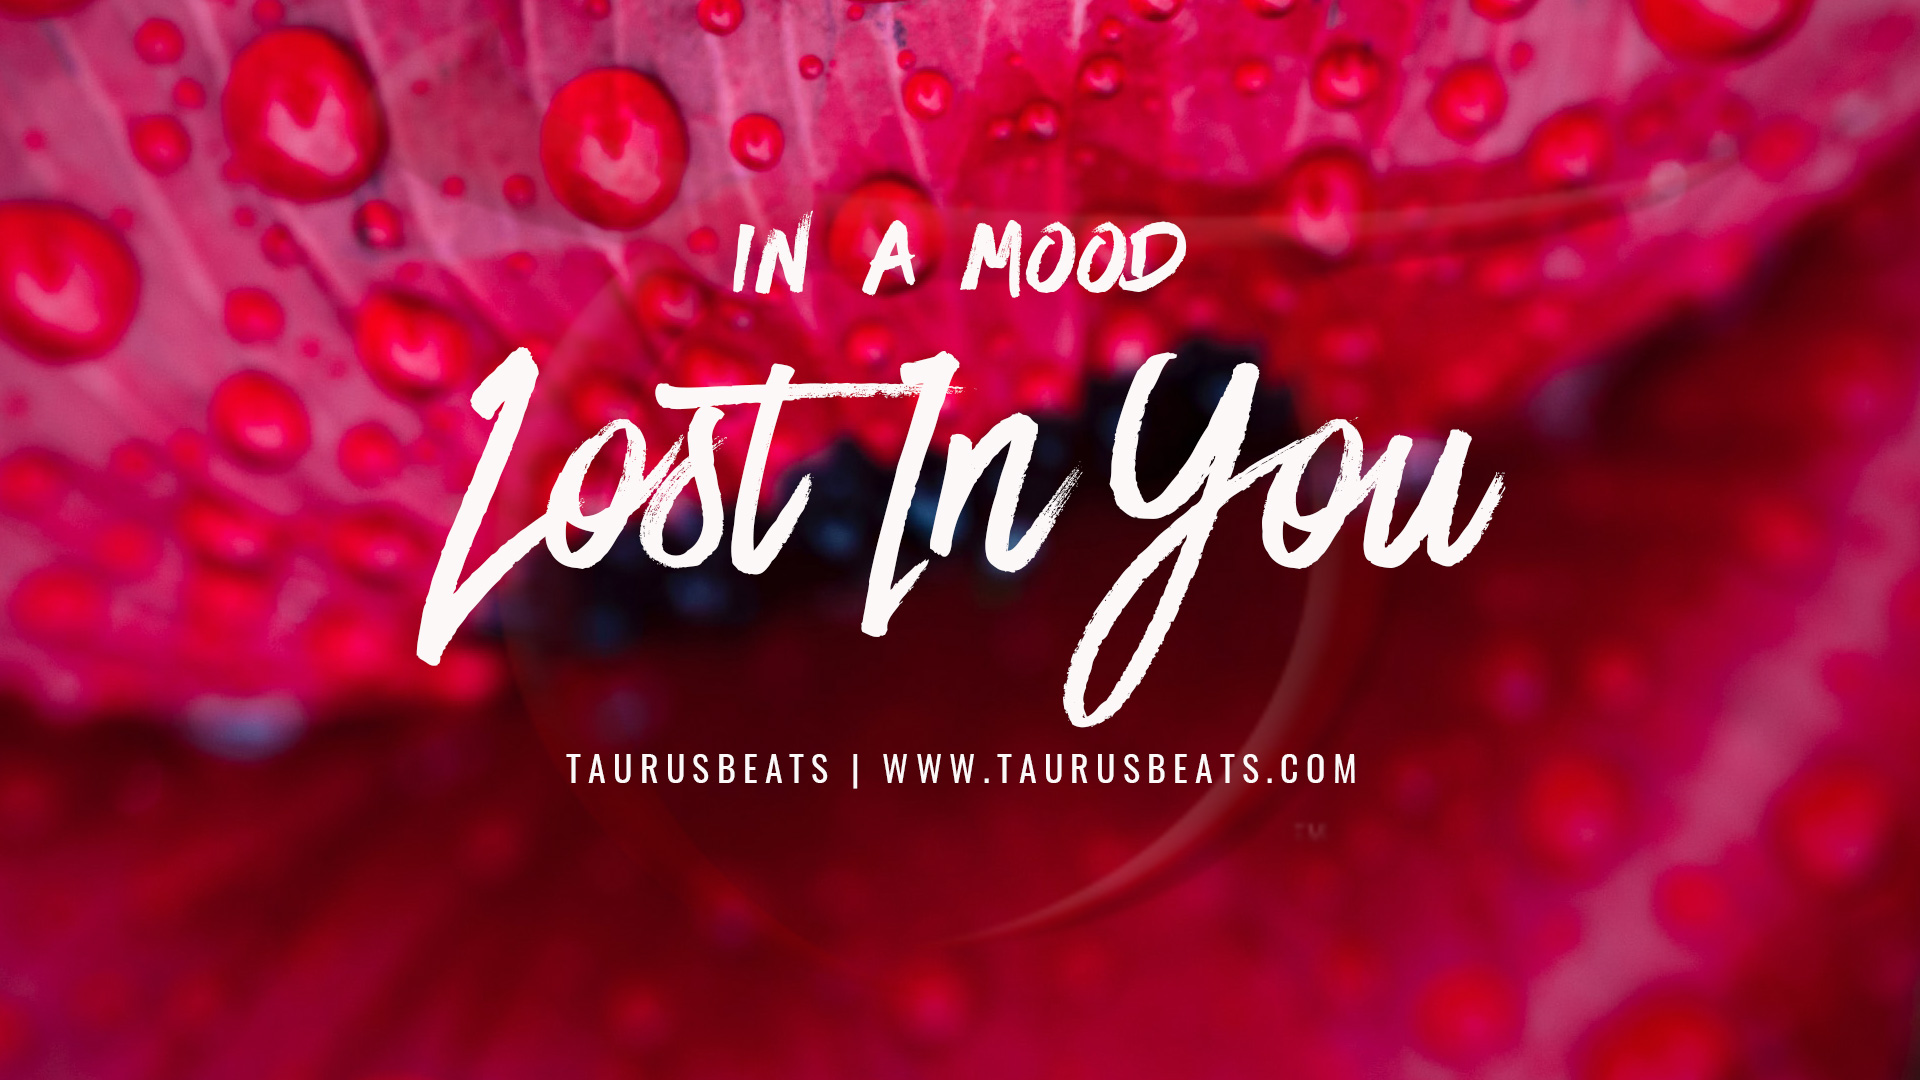 image for Lost In You